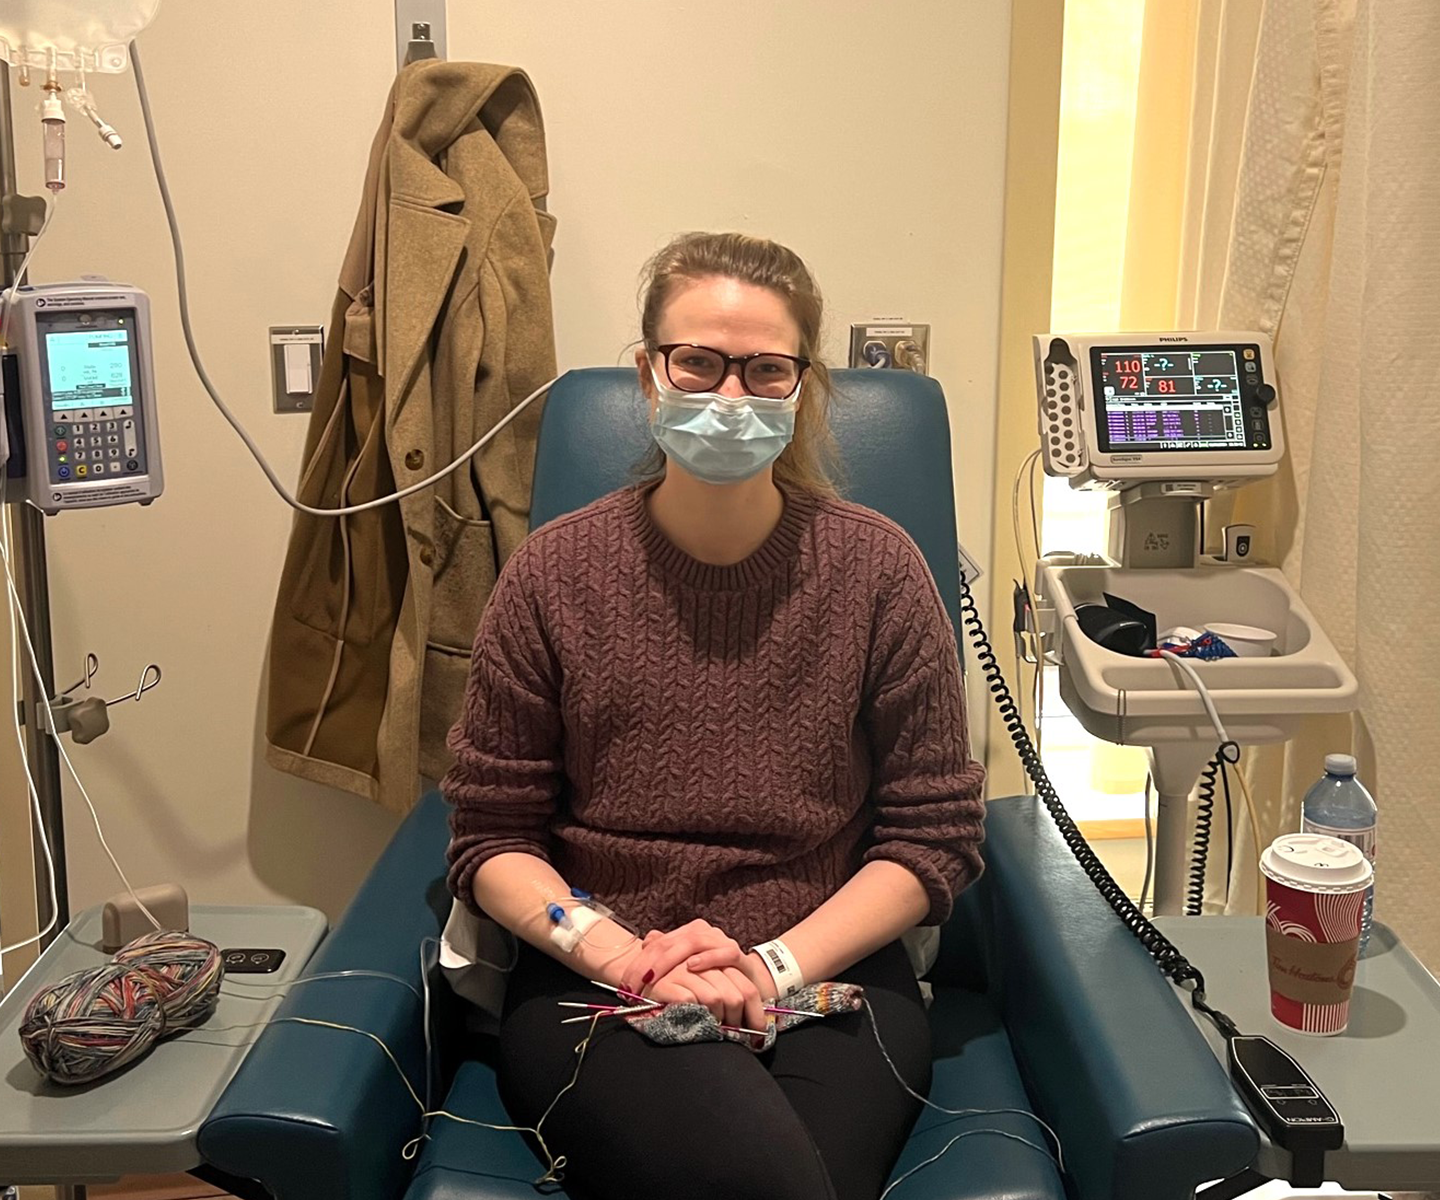 Masked person sits in blue hospital chair with intravenous tubes in one arm and a small knitting project in lap. A large bag of immunoglobulin being infused hangs above.  